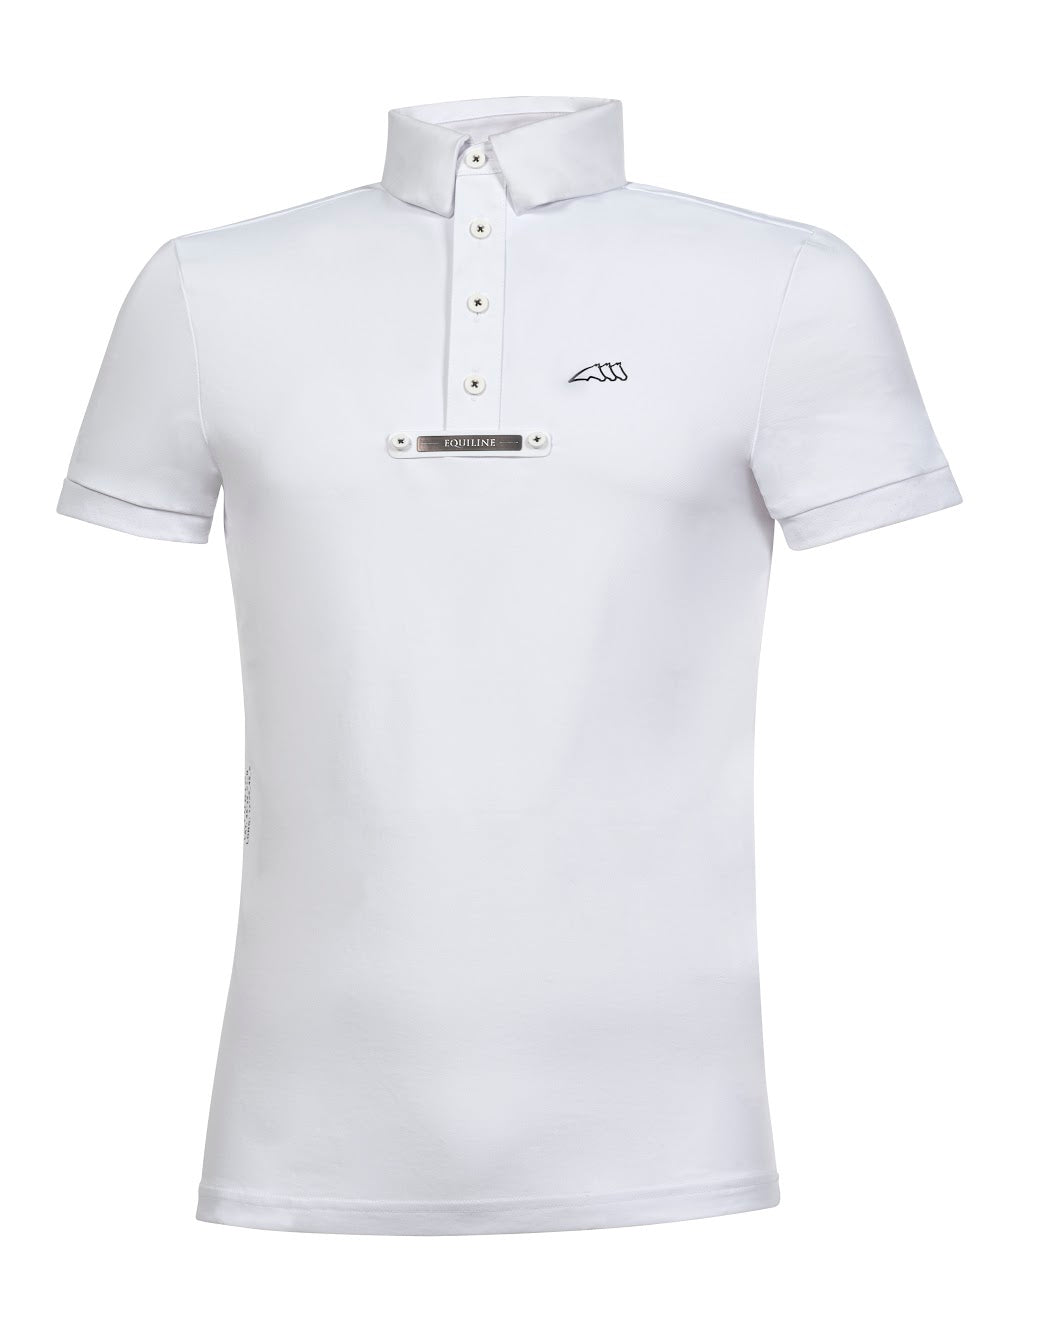 Equiline Celicec Mens White S/S Show Shirt